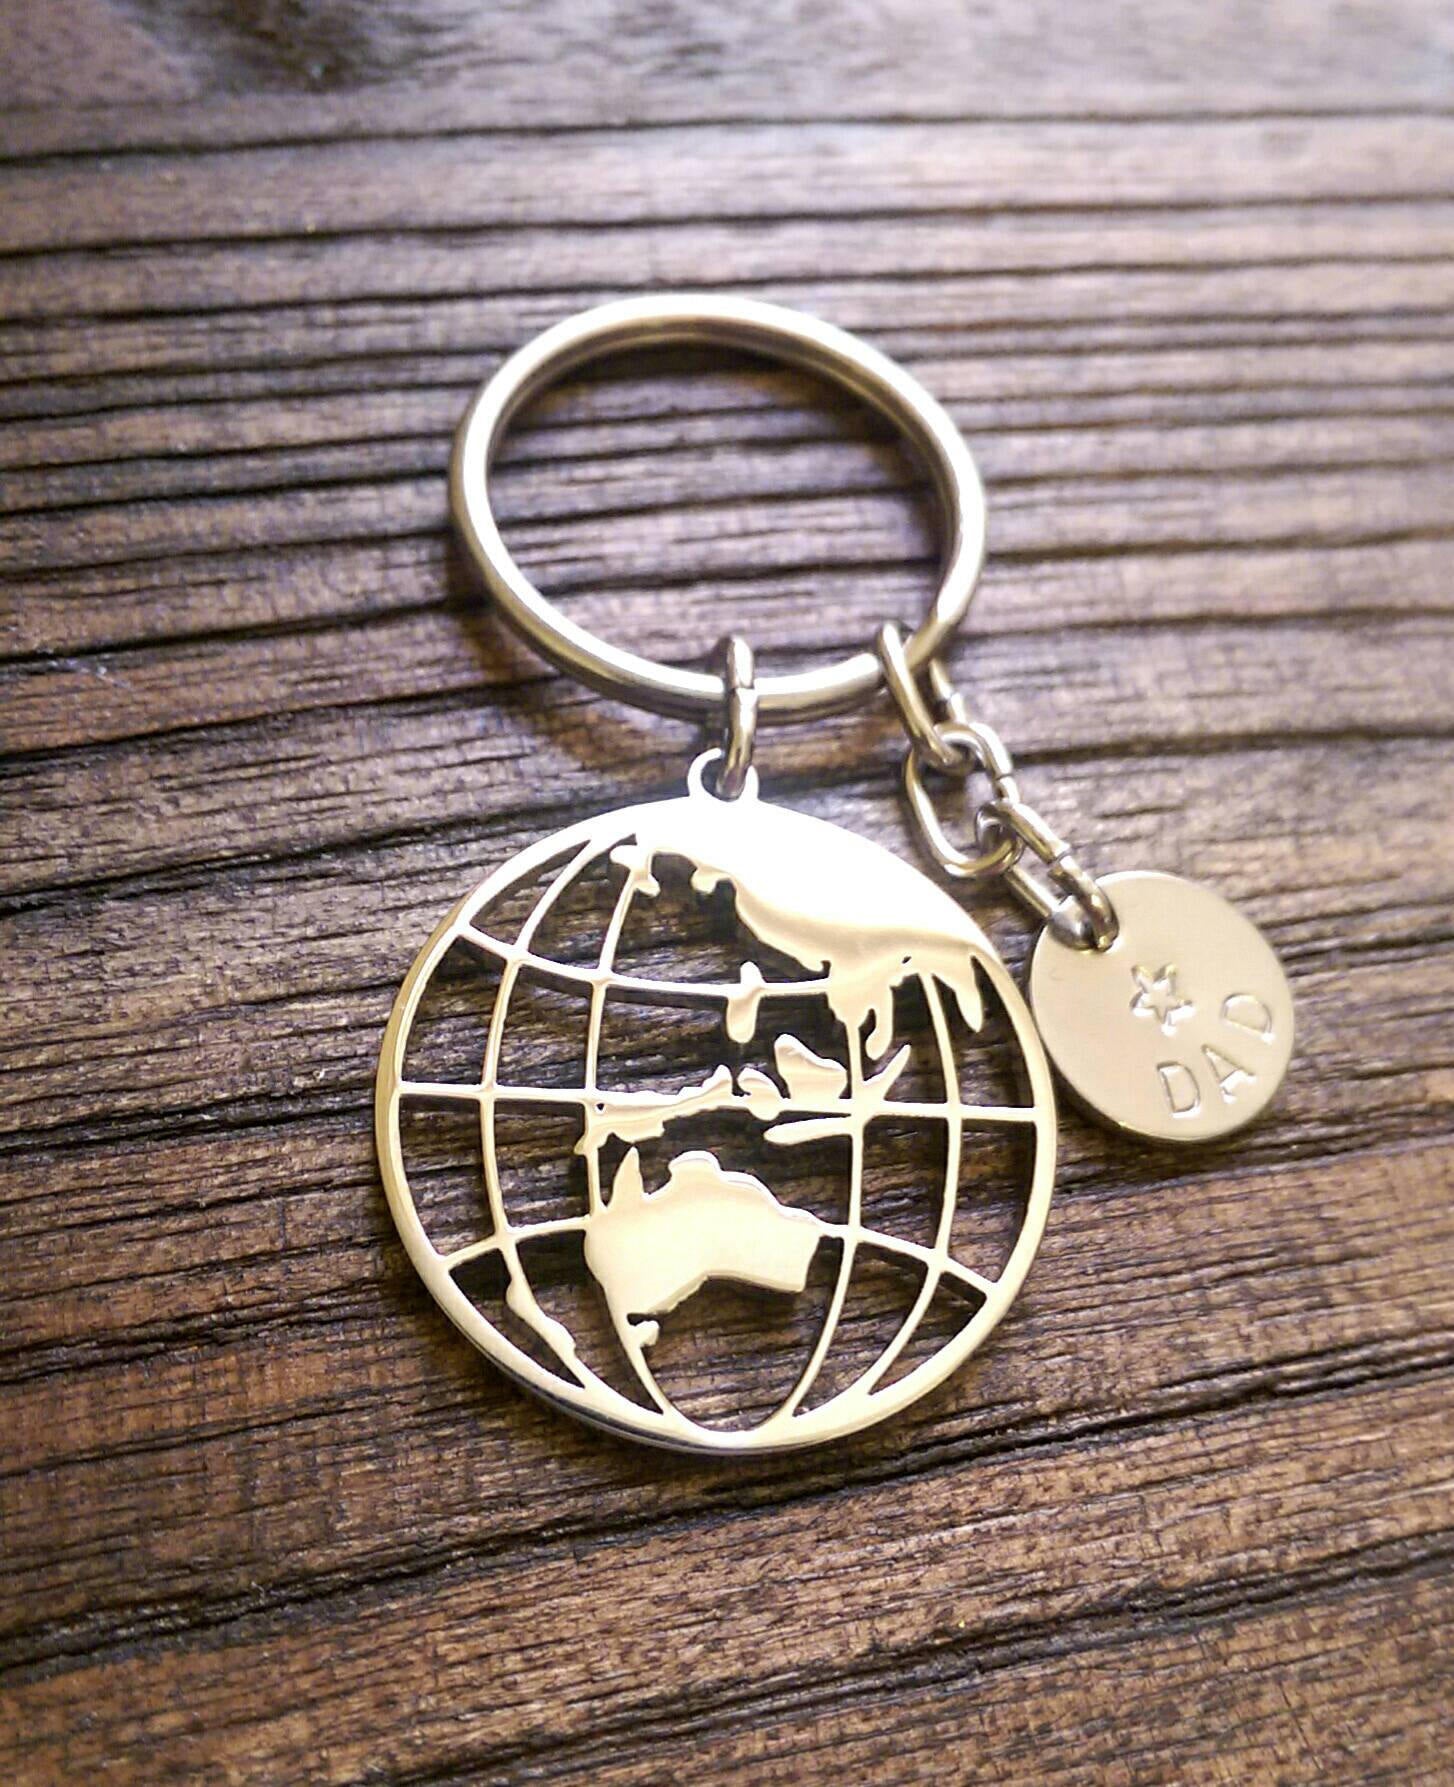 Personalised Hand Stamped Globe Key Ring Stainless Steel - Silver and Resin Designs